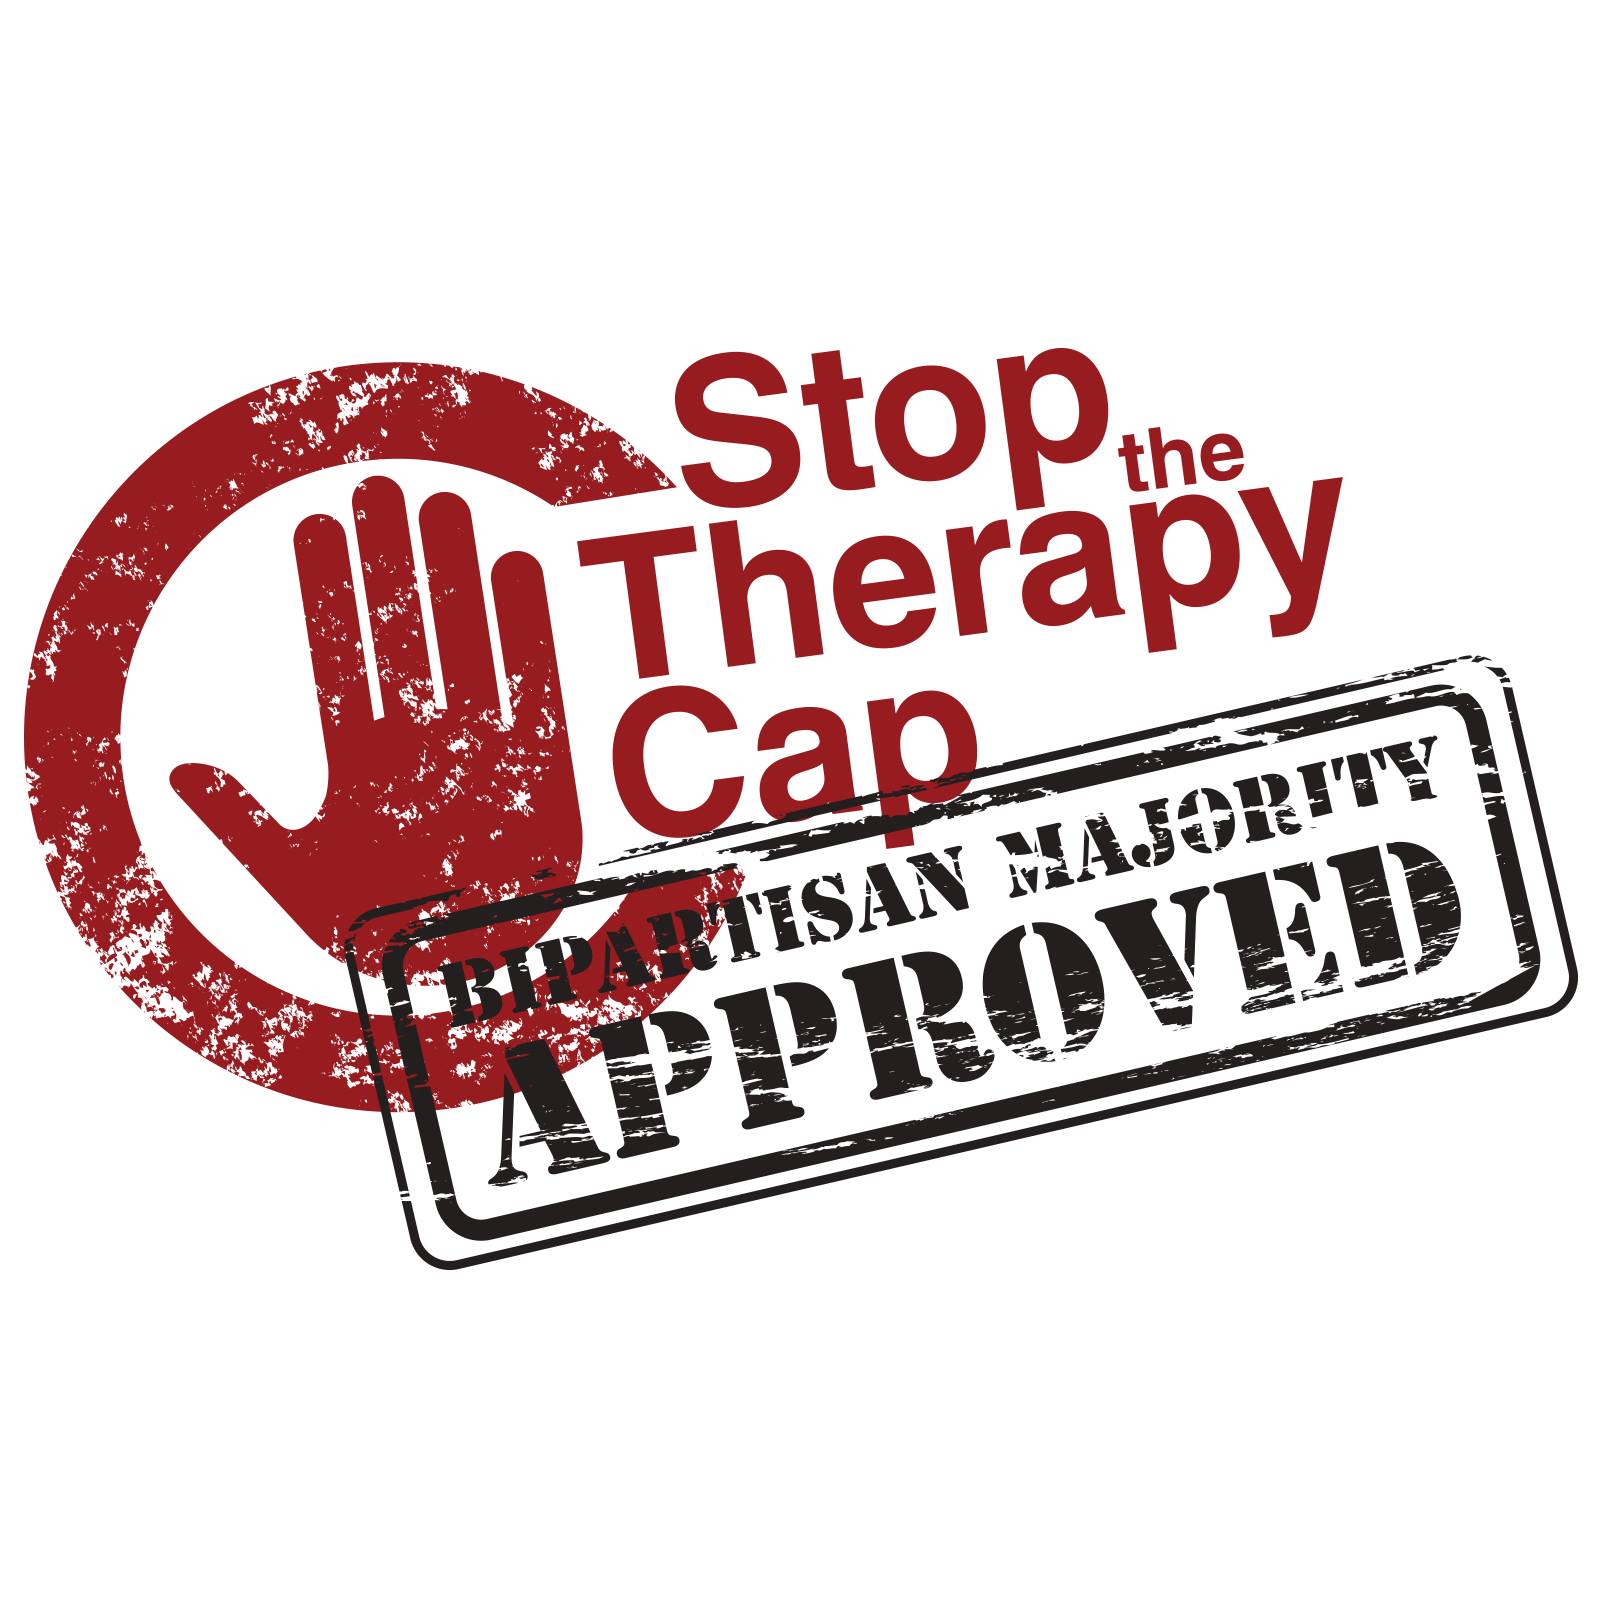 Therapy Cap Repeal